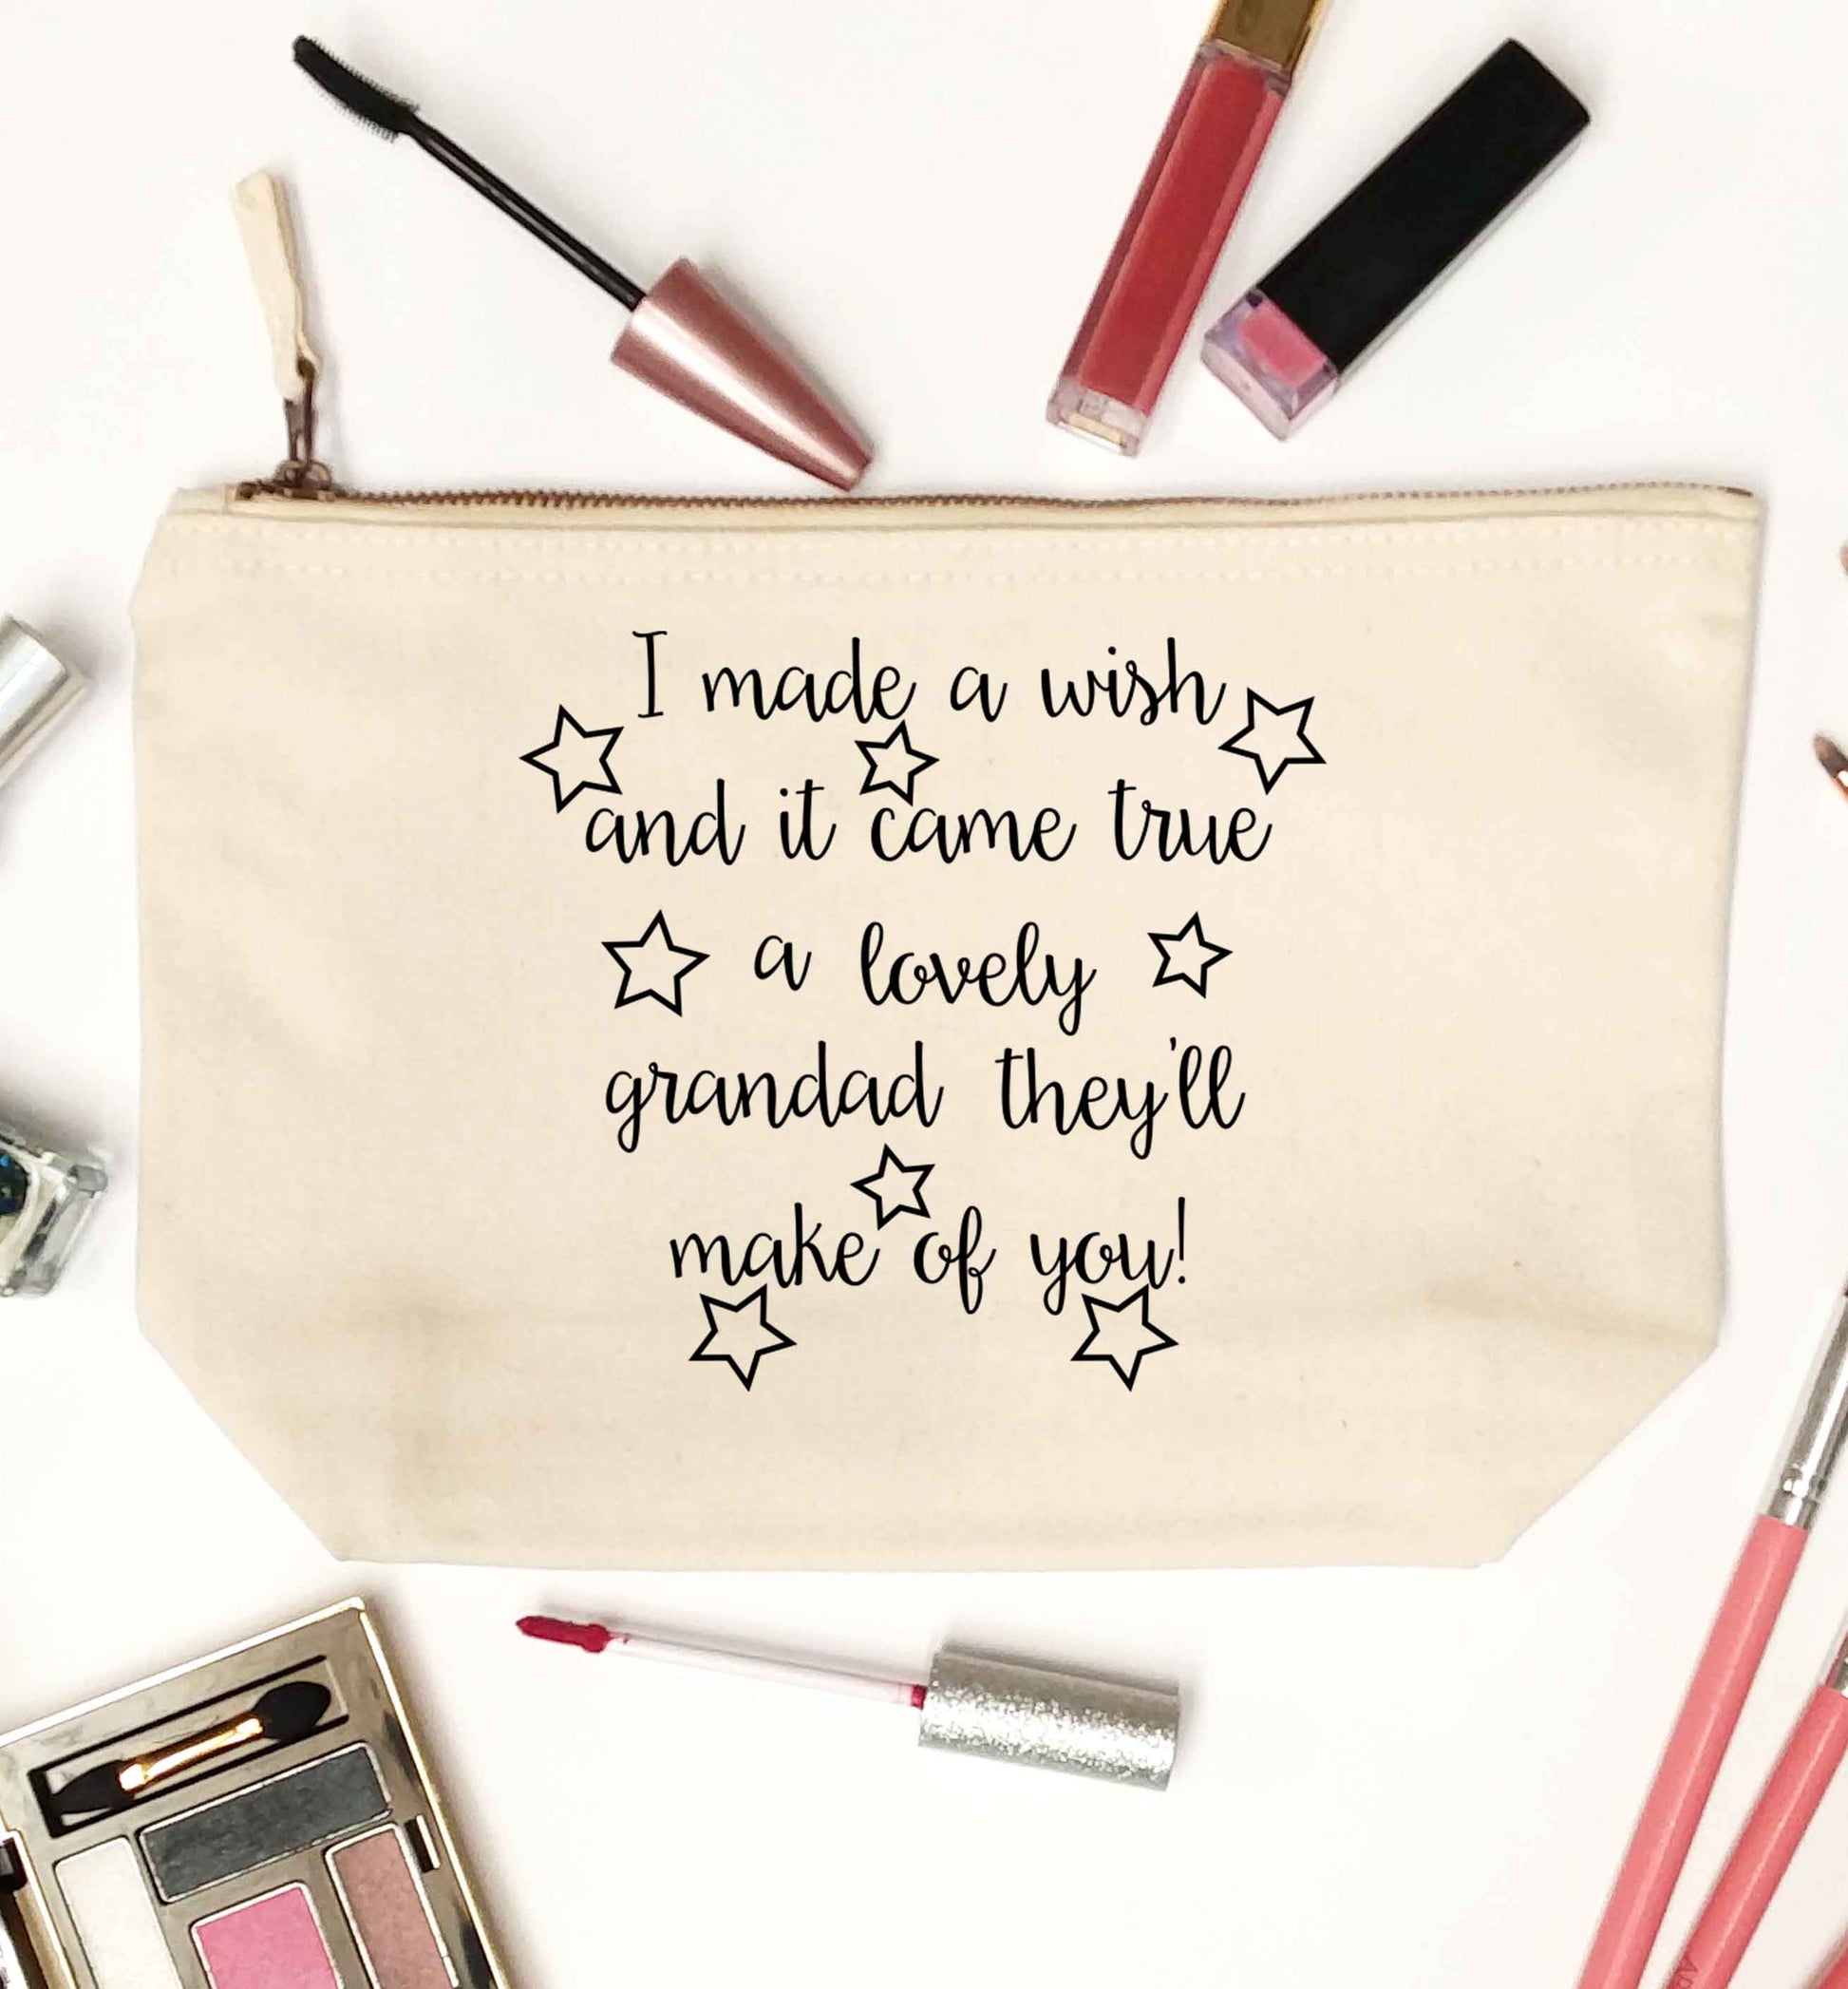 I made a wish and it came true a lovely grandad they'll make of you! natural makeup bag